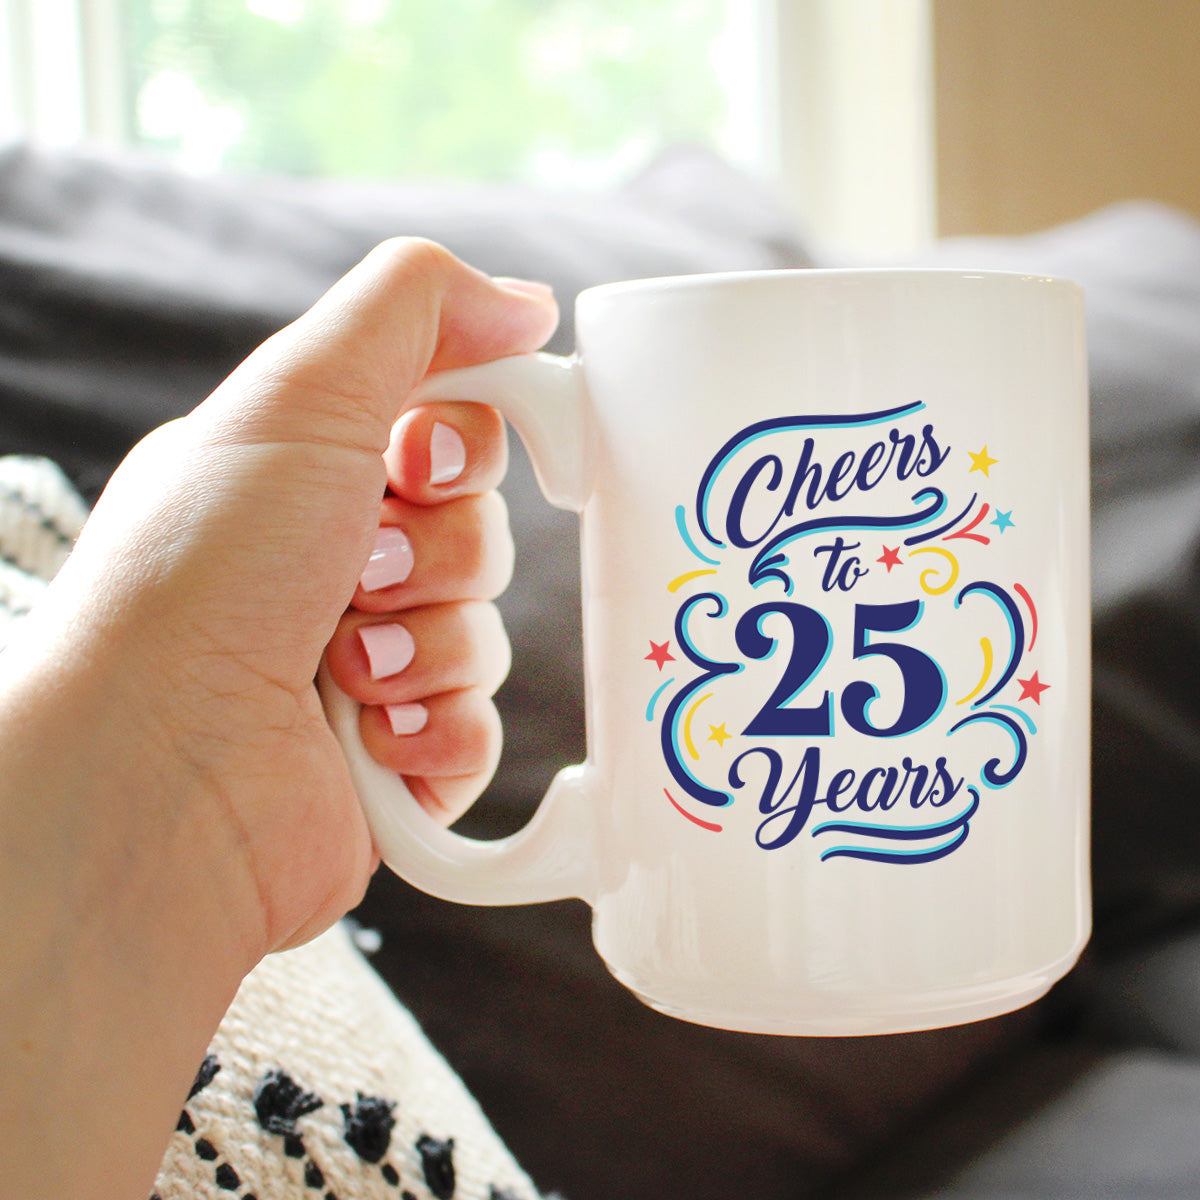 Cheers to 25 Years - Coffee Mug Gifts for Women &amp; Men - 25th Anniversary Party Decor